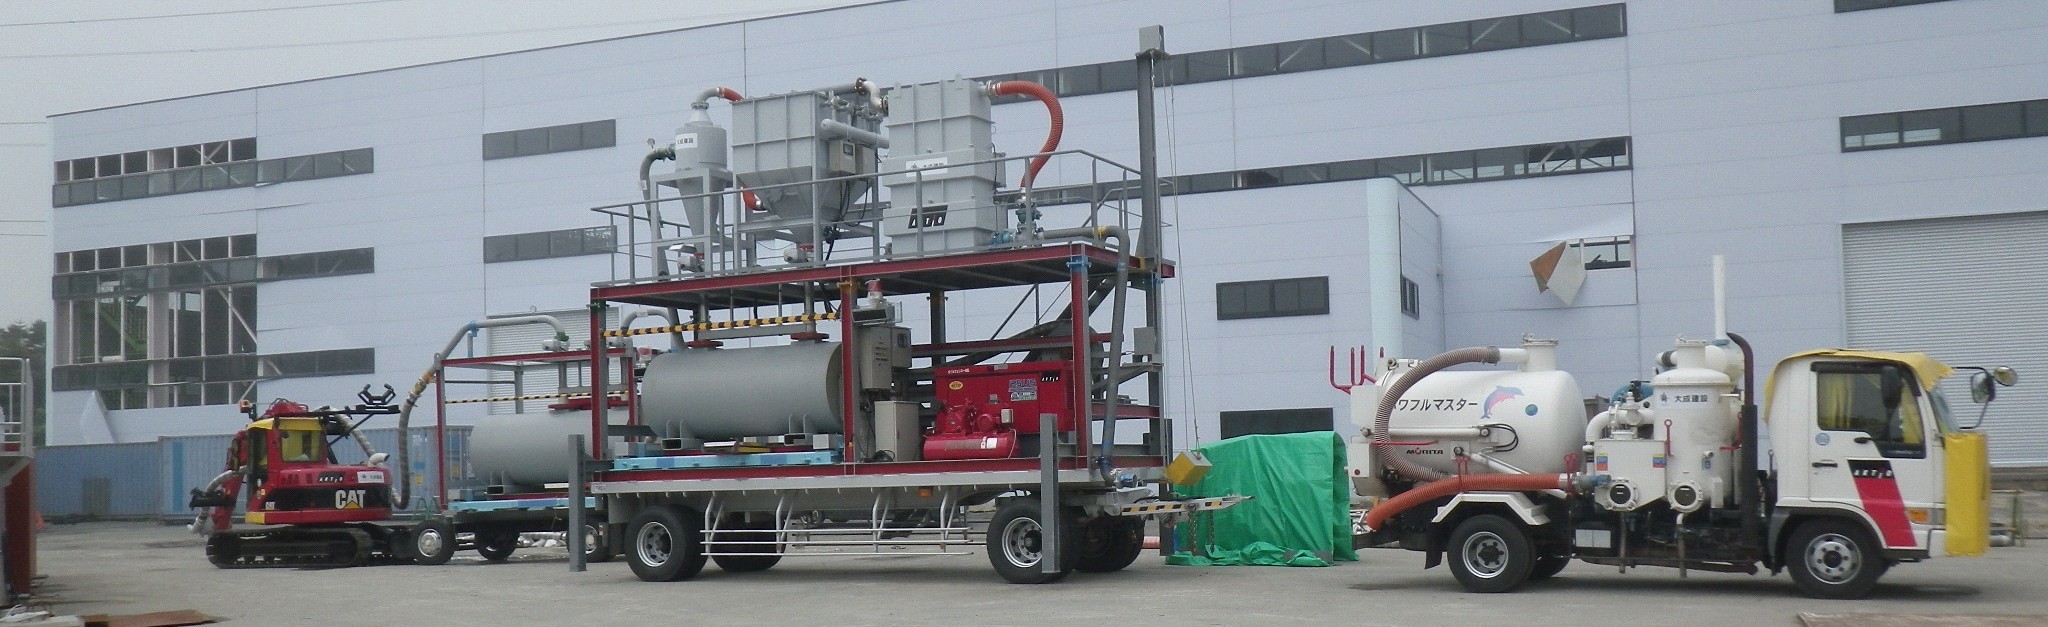 Overview of Dust Collector System